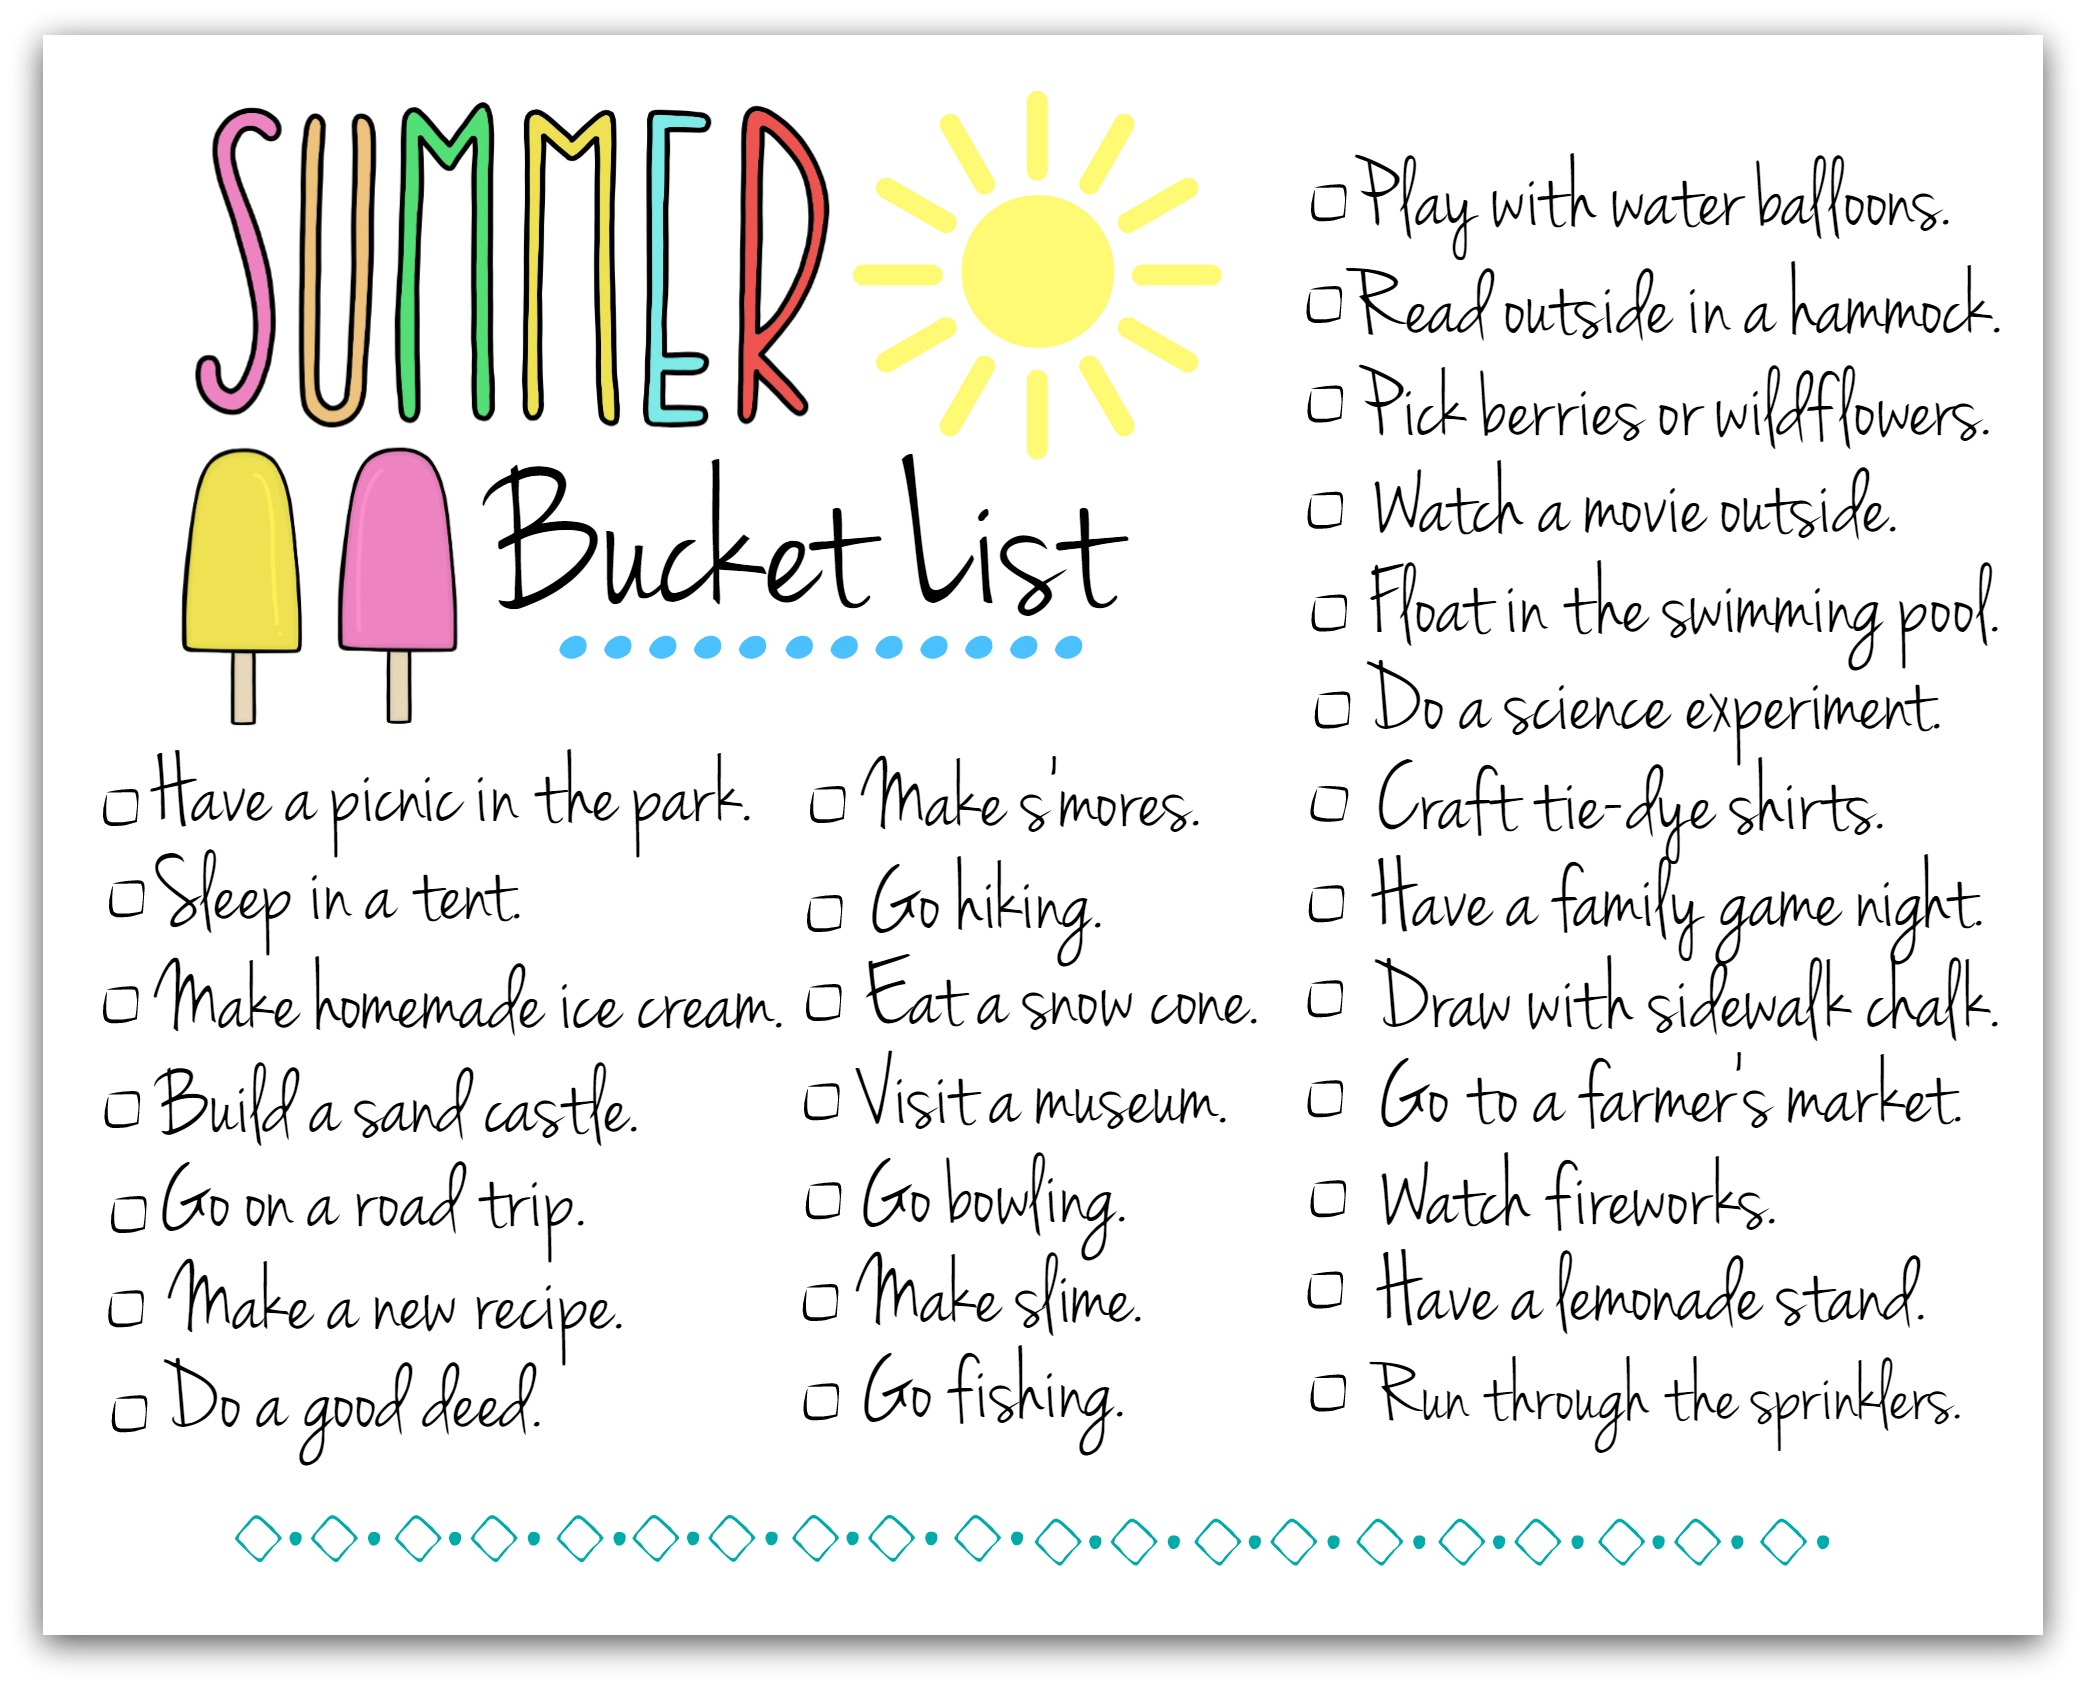 10-the-origin-printable-200-things-to-do-in-summer-list